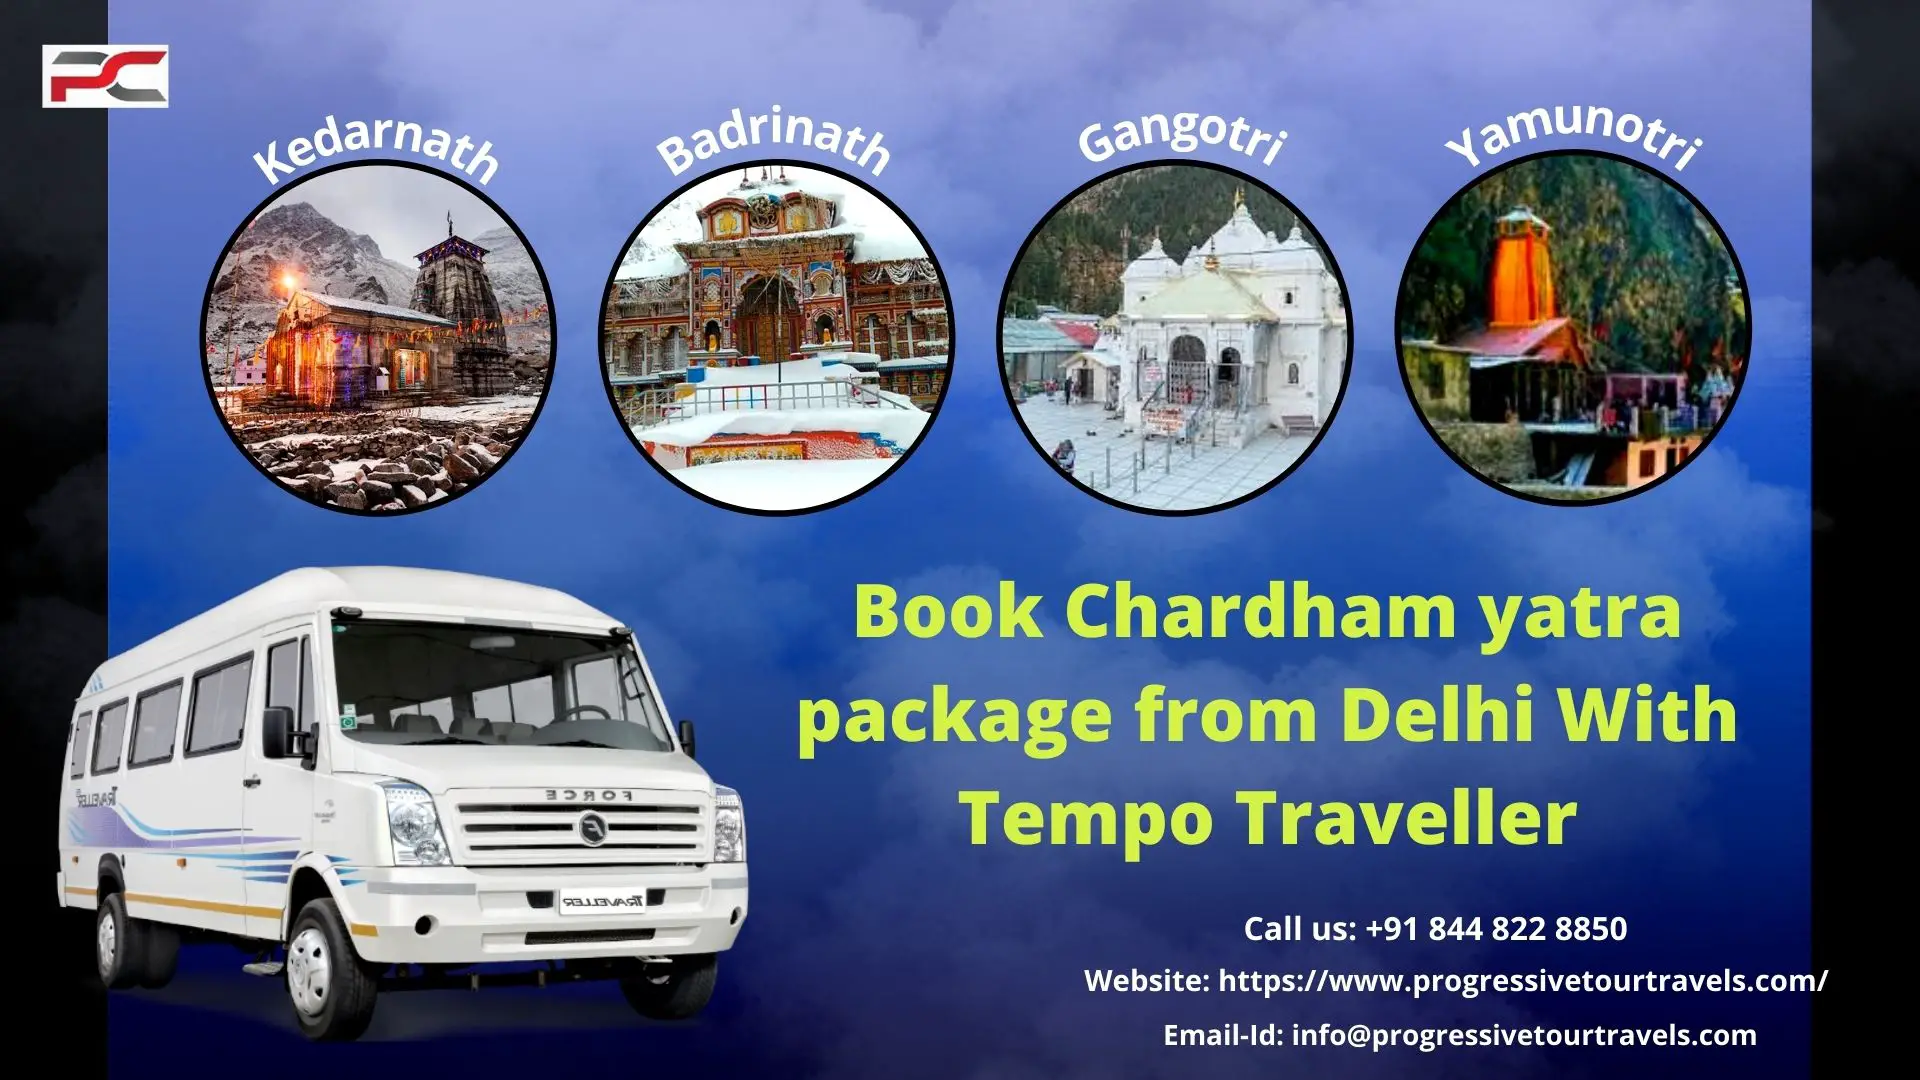 Book Chardham yatra package from Delhi With Tempo Traveller-b202db81